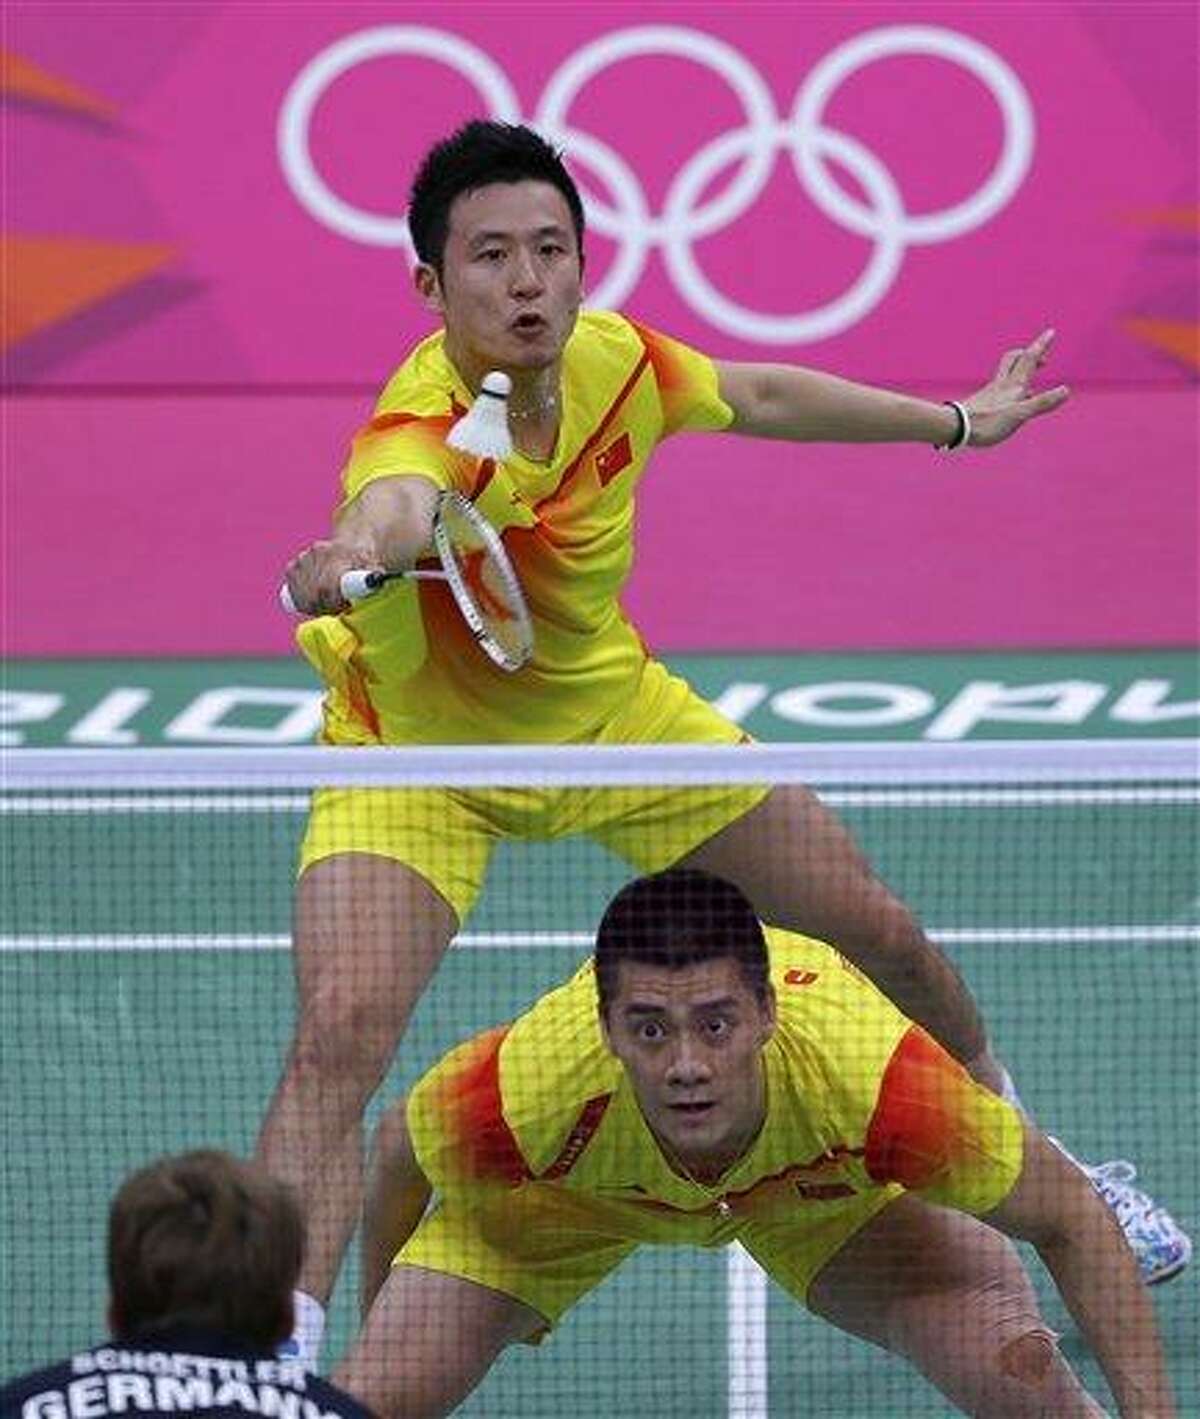 China's Cai Yun, top left, and Fu Haifeng play against Germany's Johannes Schoettler, foreground, and Ingo Kindervater, unseen, at a men's doubles badminton match of the 2012 Summer Olympics, Sunday, July 29, 2012, in London. (AP Photo/Saurabh Das)